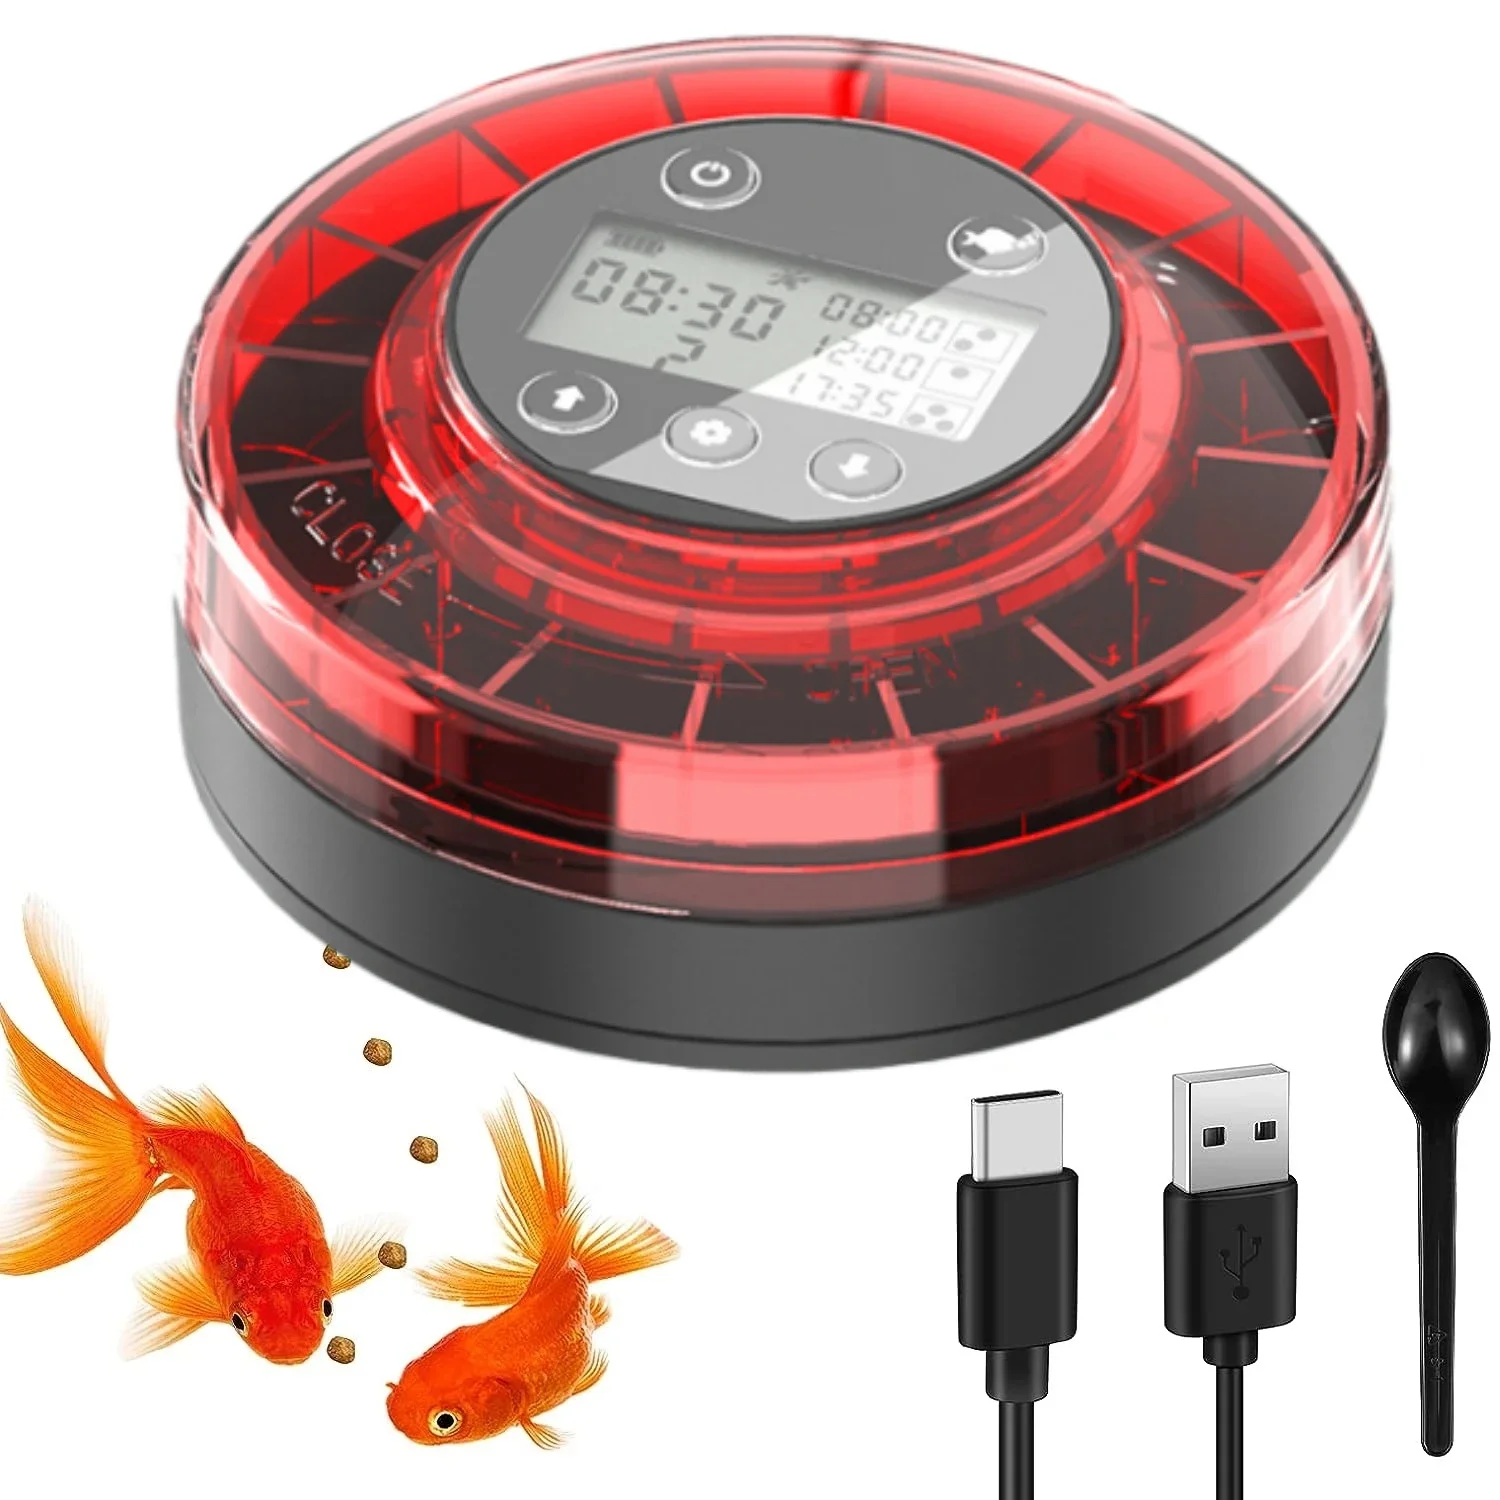 

Automatic Fish Feeder For Aquarium,Food Dispenser With Timer, Rechargeable Timer Feeder USB Cable, LCD Display